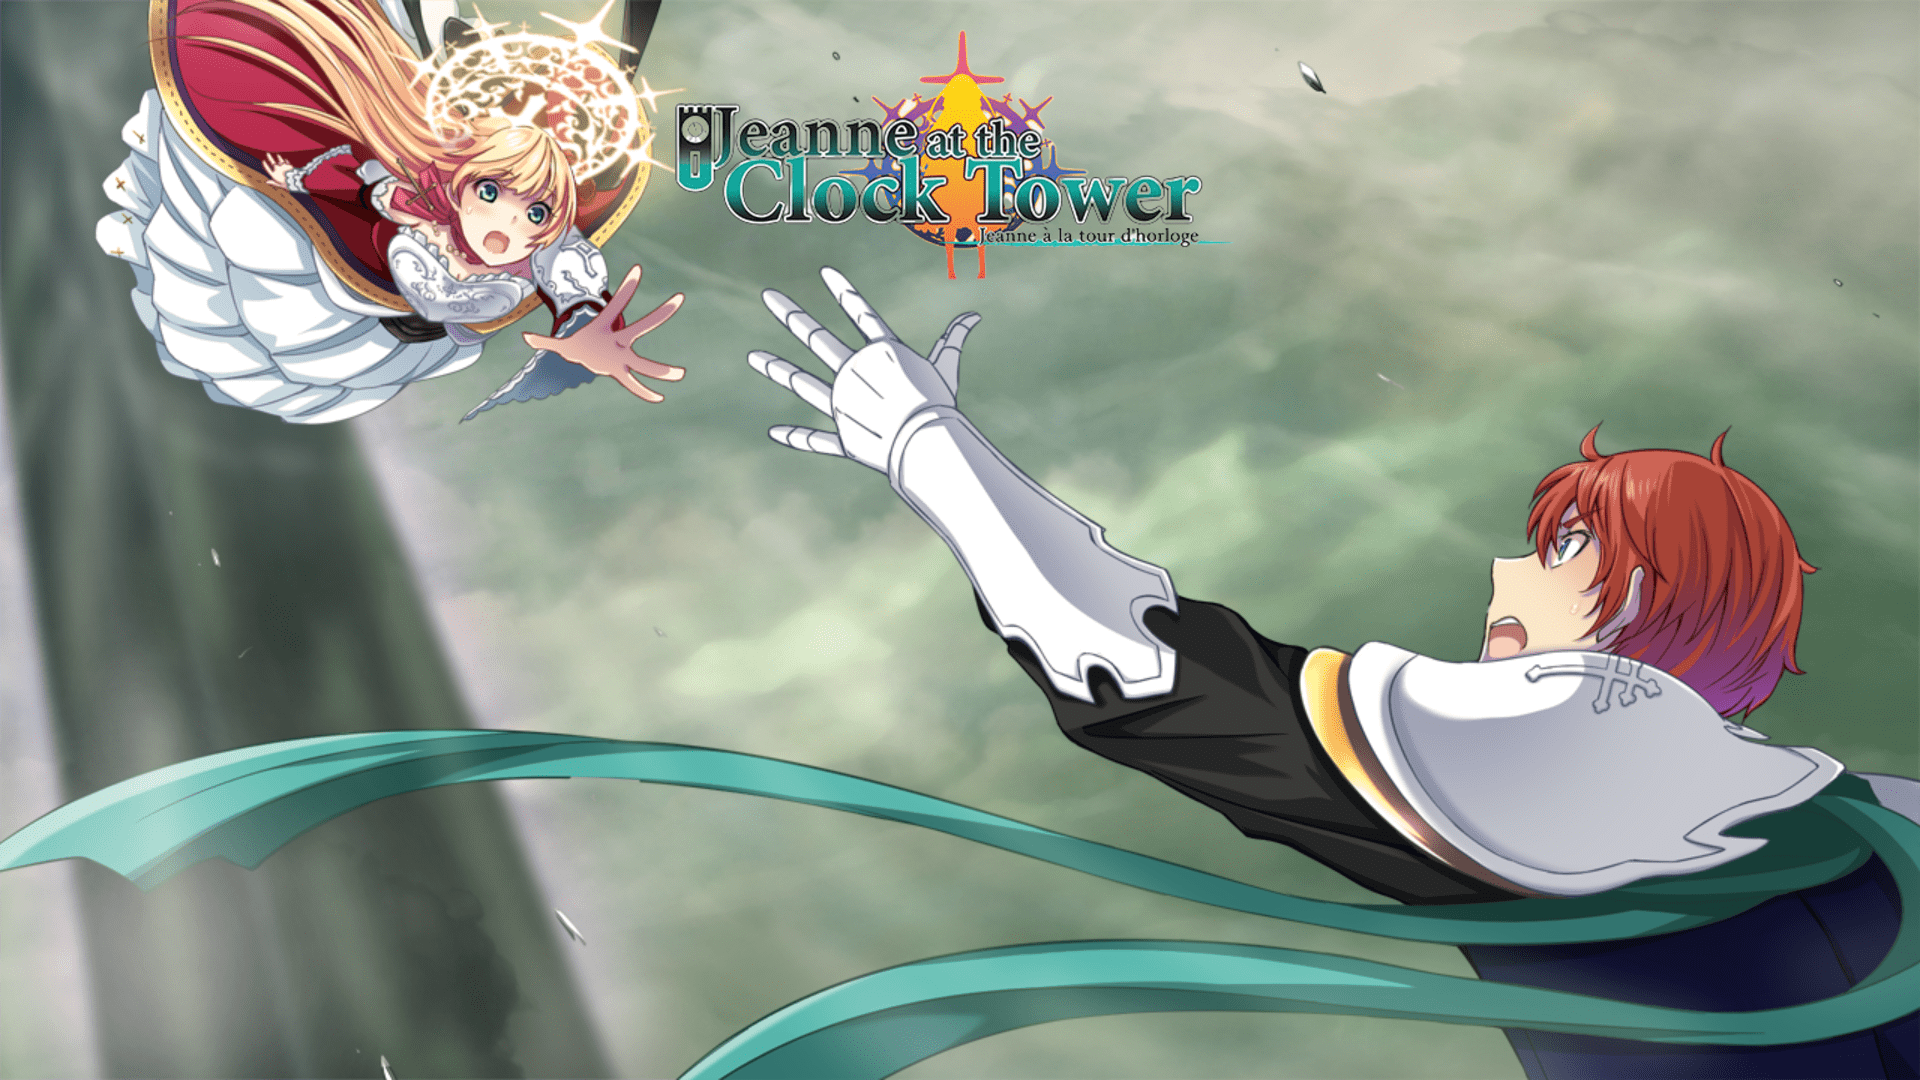 Jeanne at the Clocktower - Featured Image